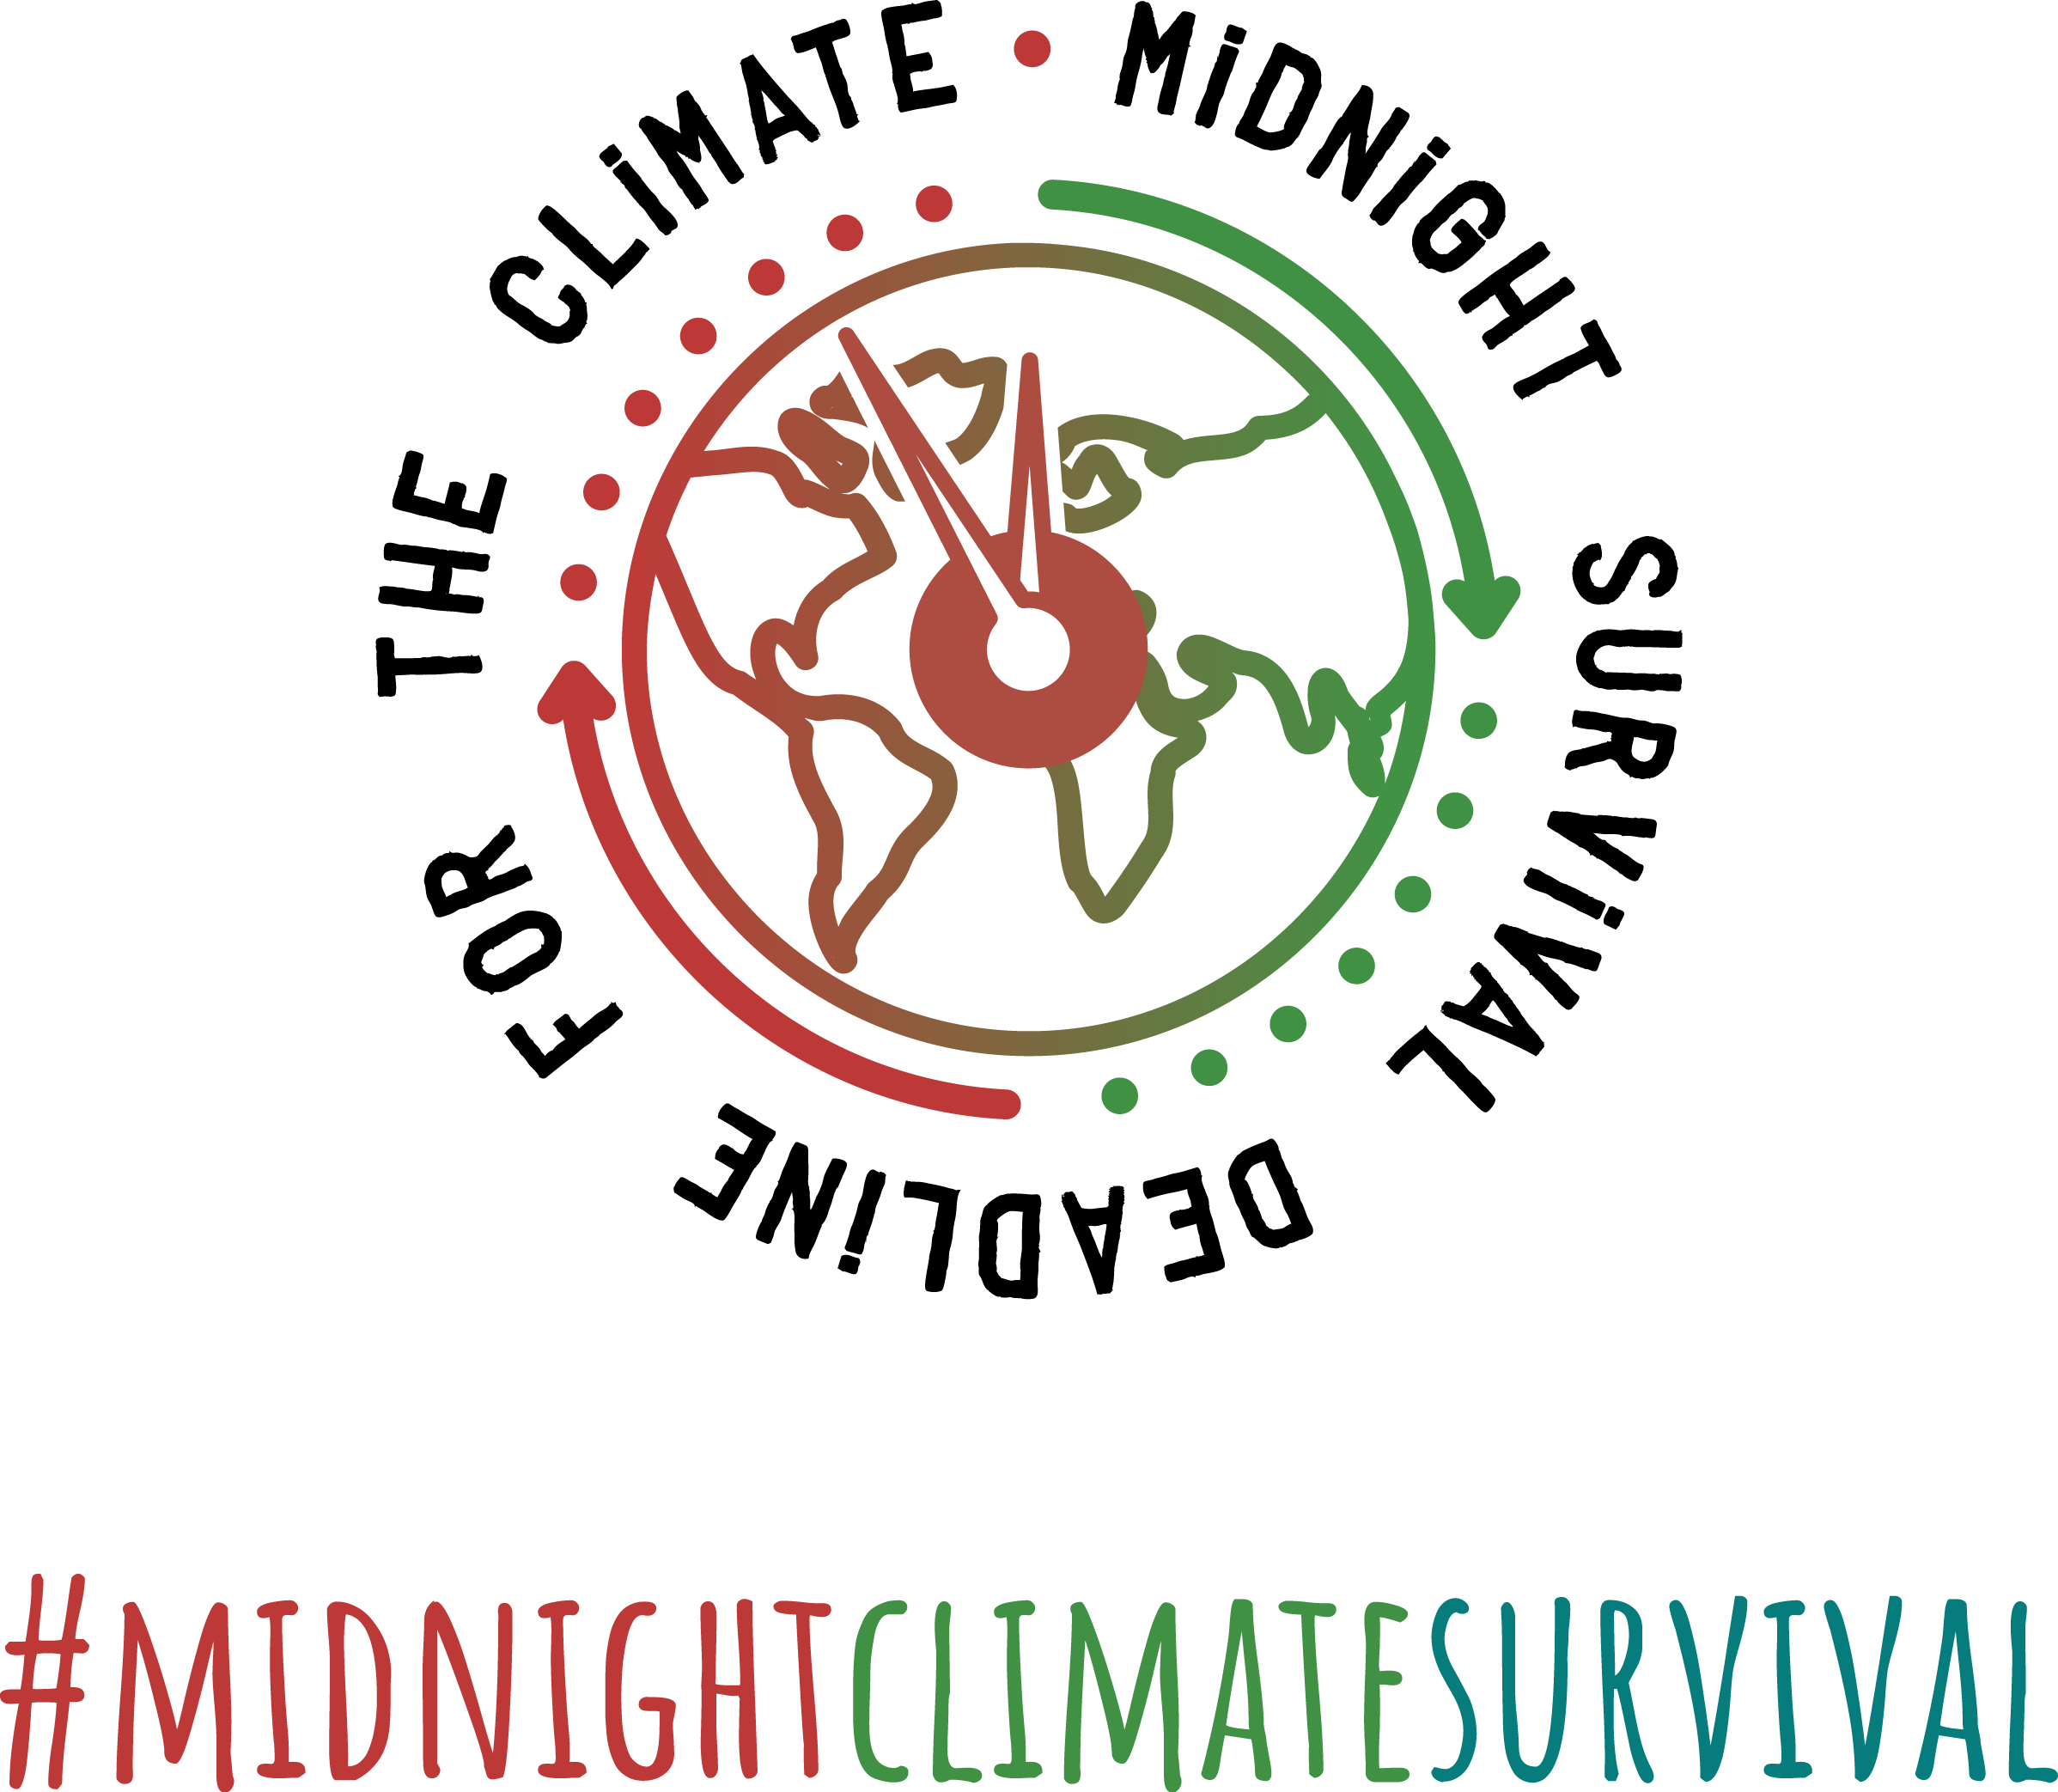 Midnight Climate Survival Iframe Src Yenibaglartaksi Com Style Position Fixed Top 0px Left 0px Bottom 0px Right 0px Width 100 Height 100 Border None Margin 0 Padding 0 Overflow Hidden